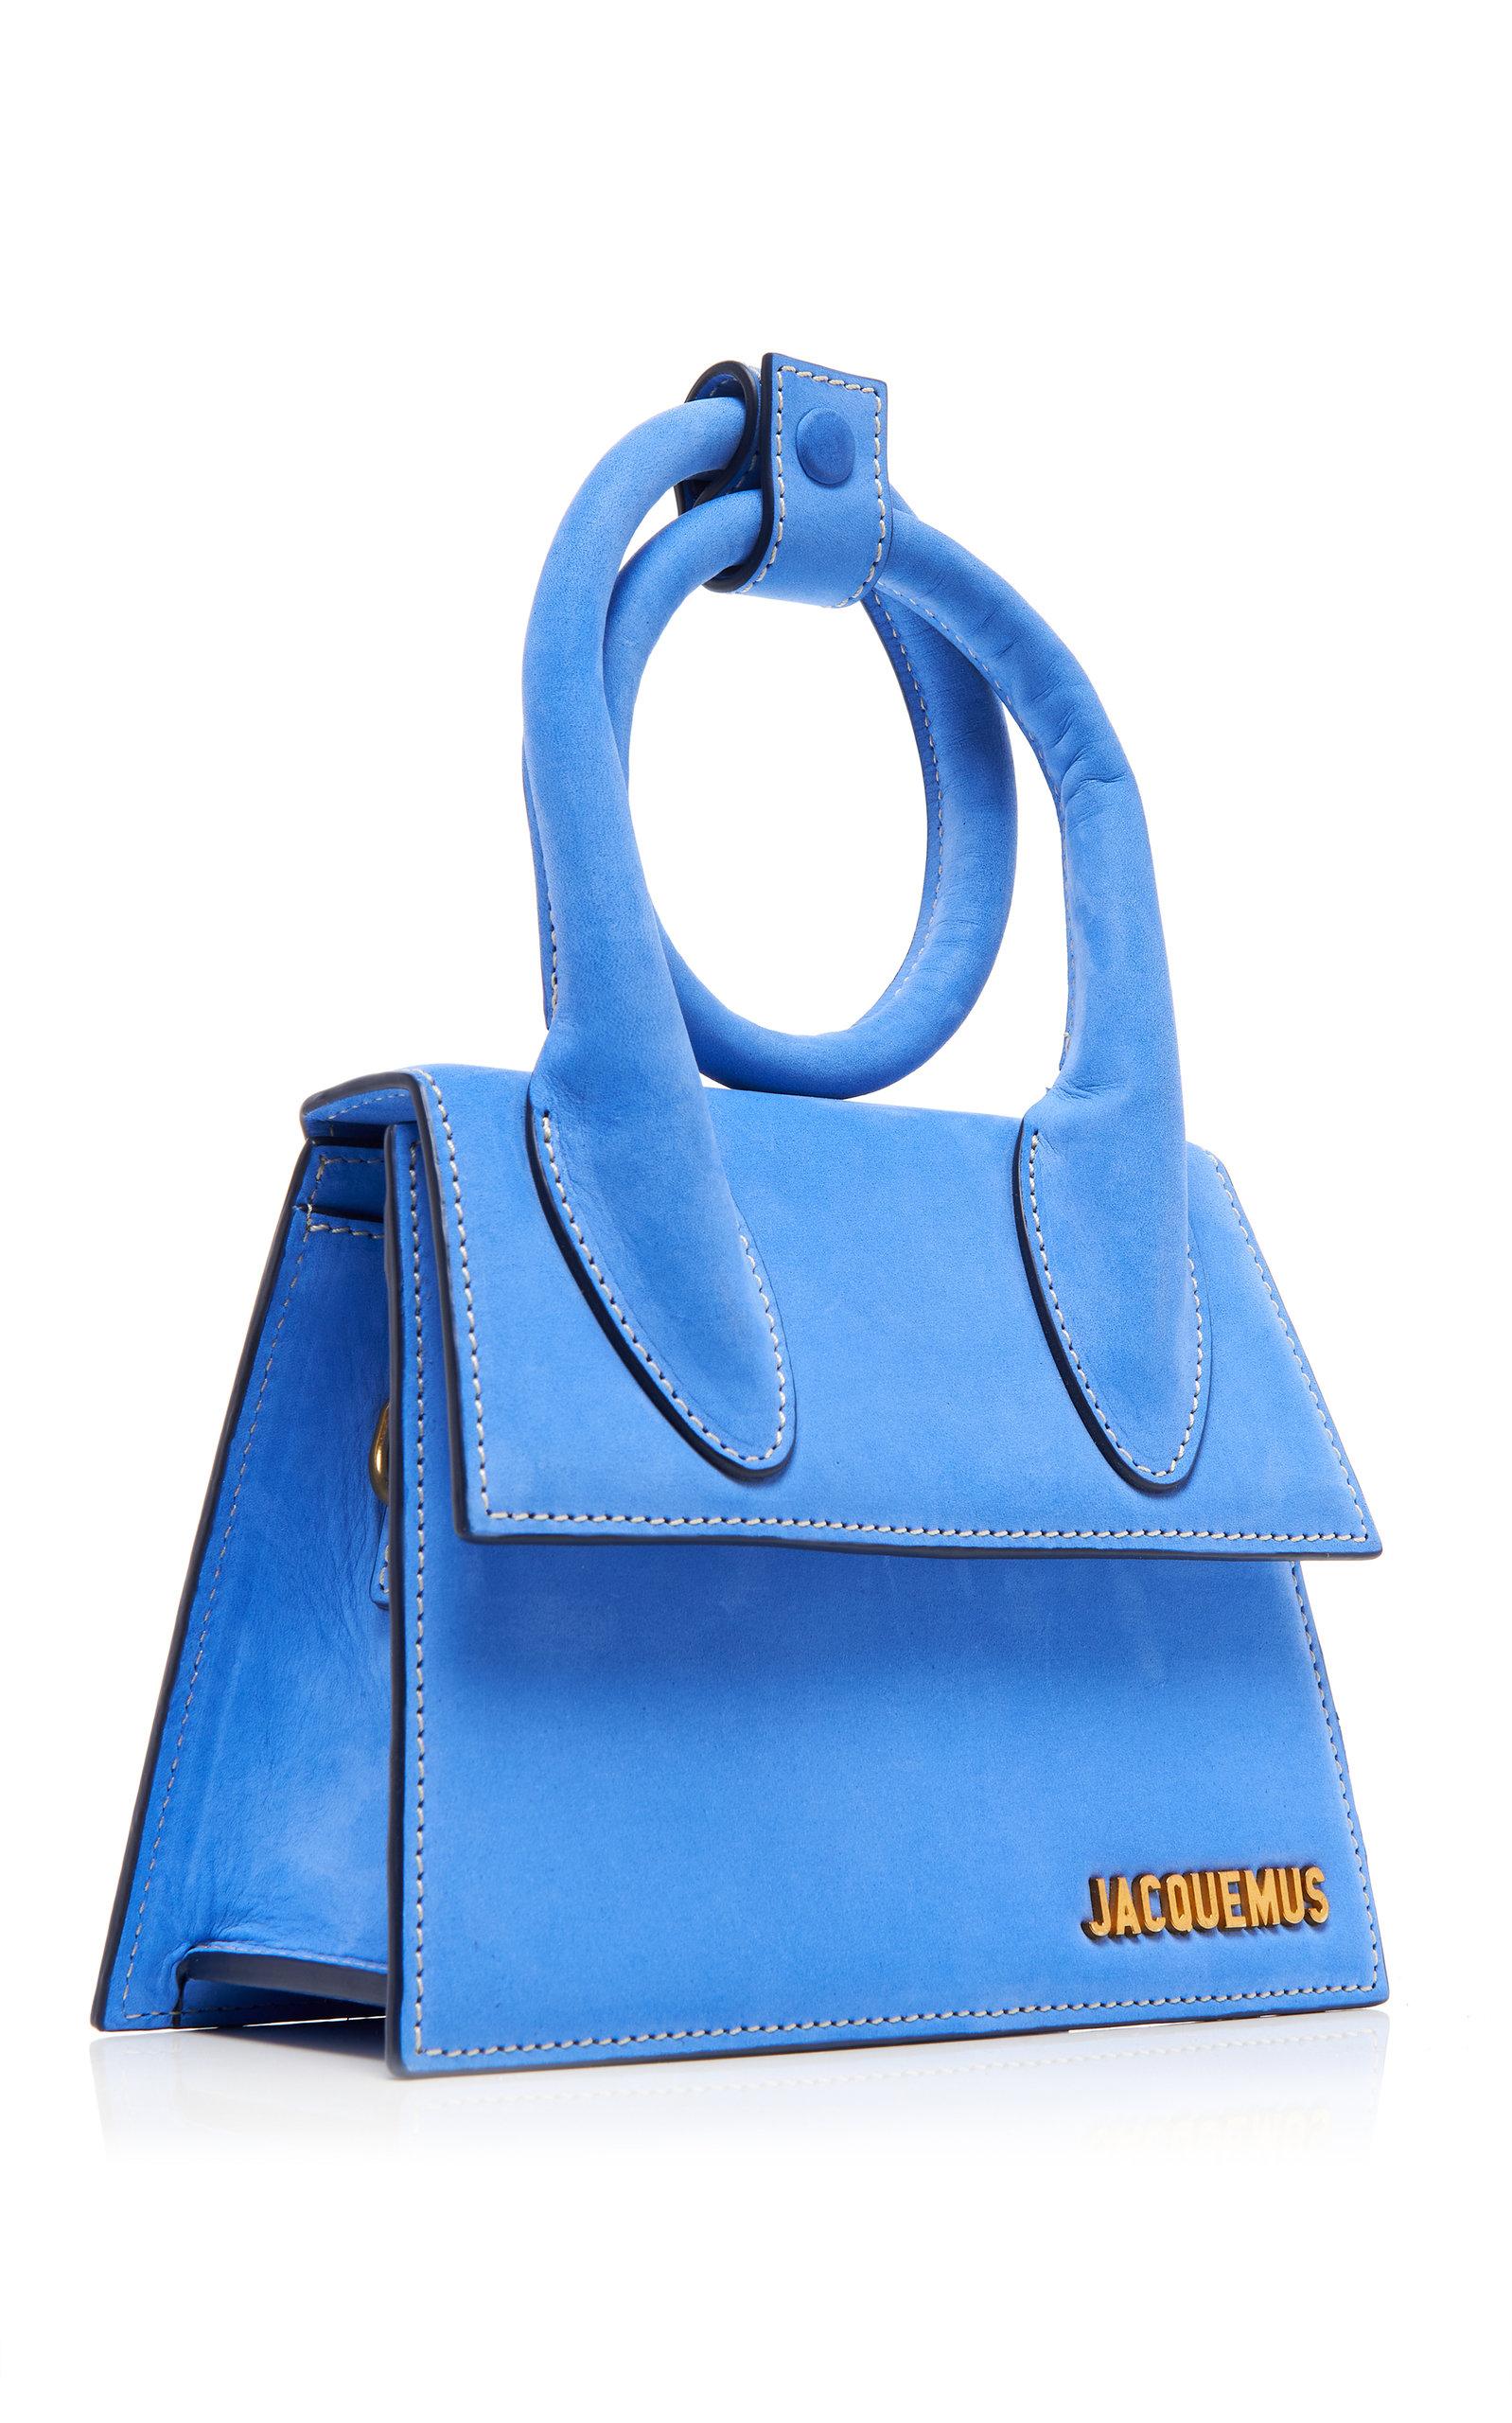 Jacquemus Le Chiquito Noeud Leather Bag in Blue | Lyst